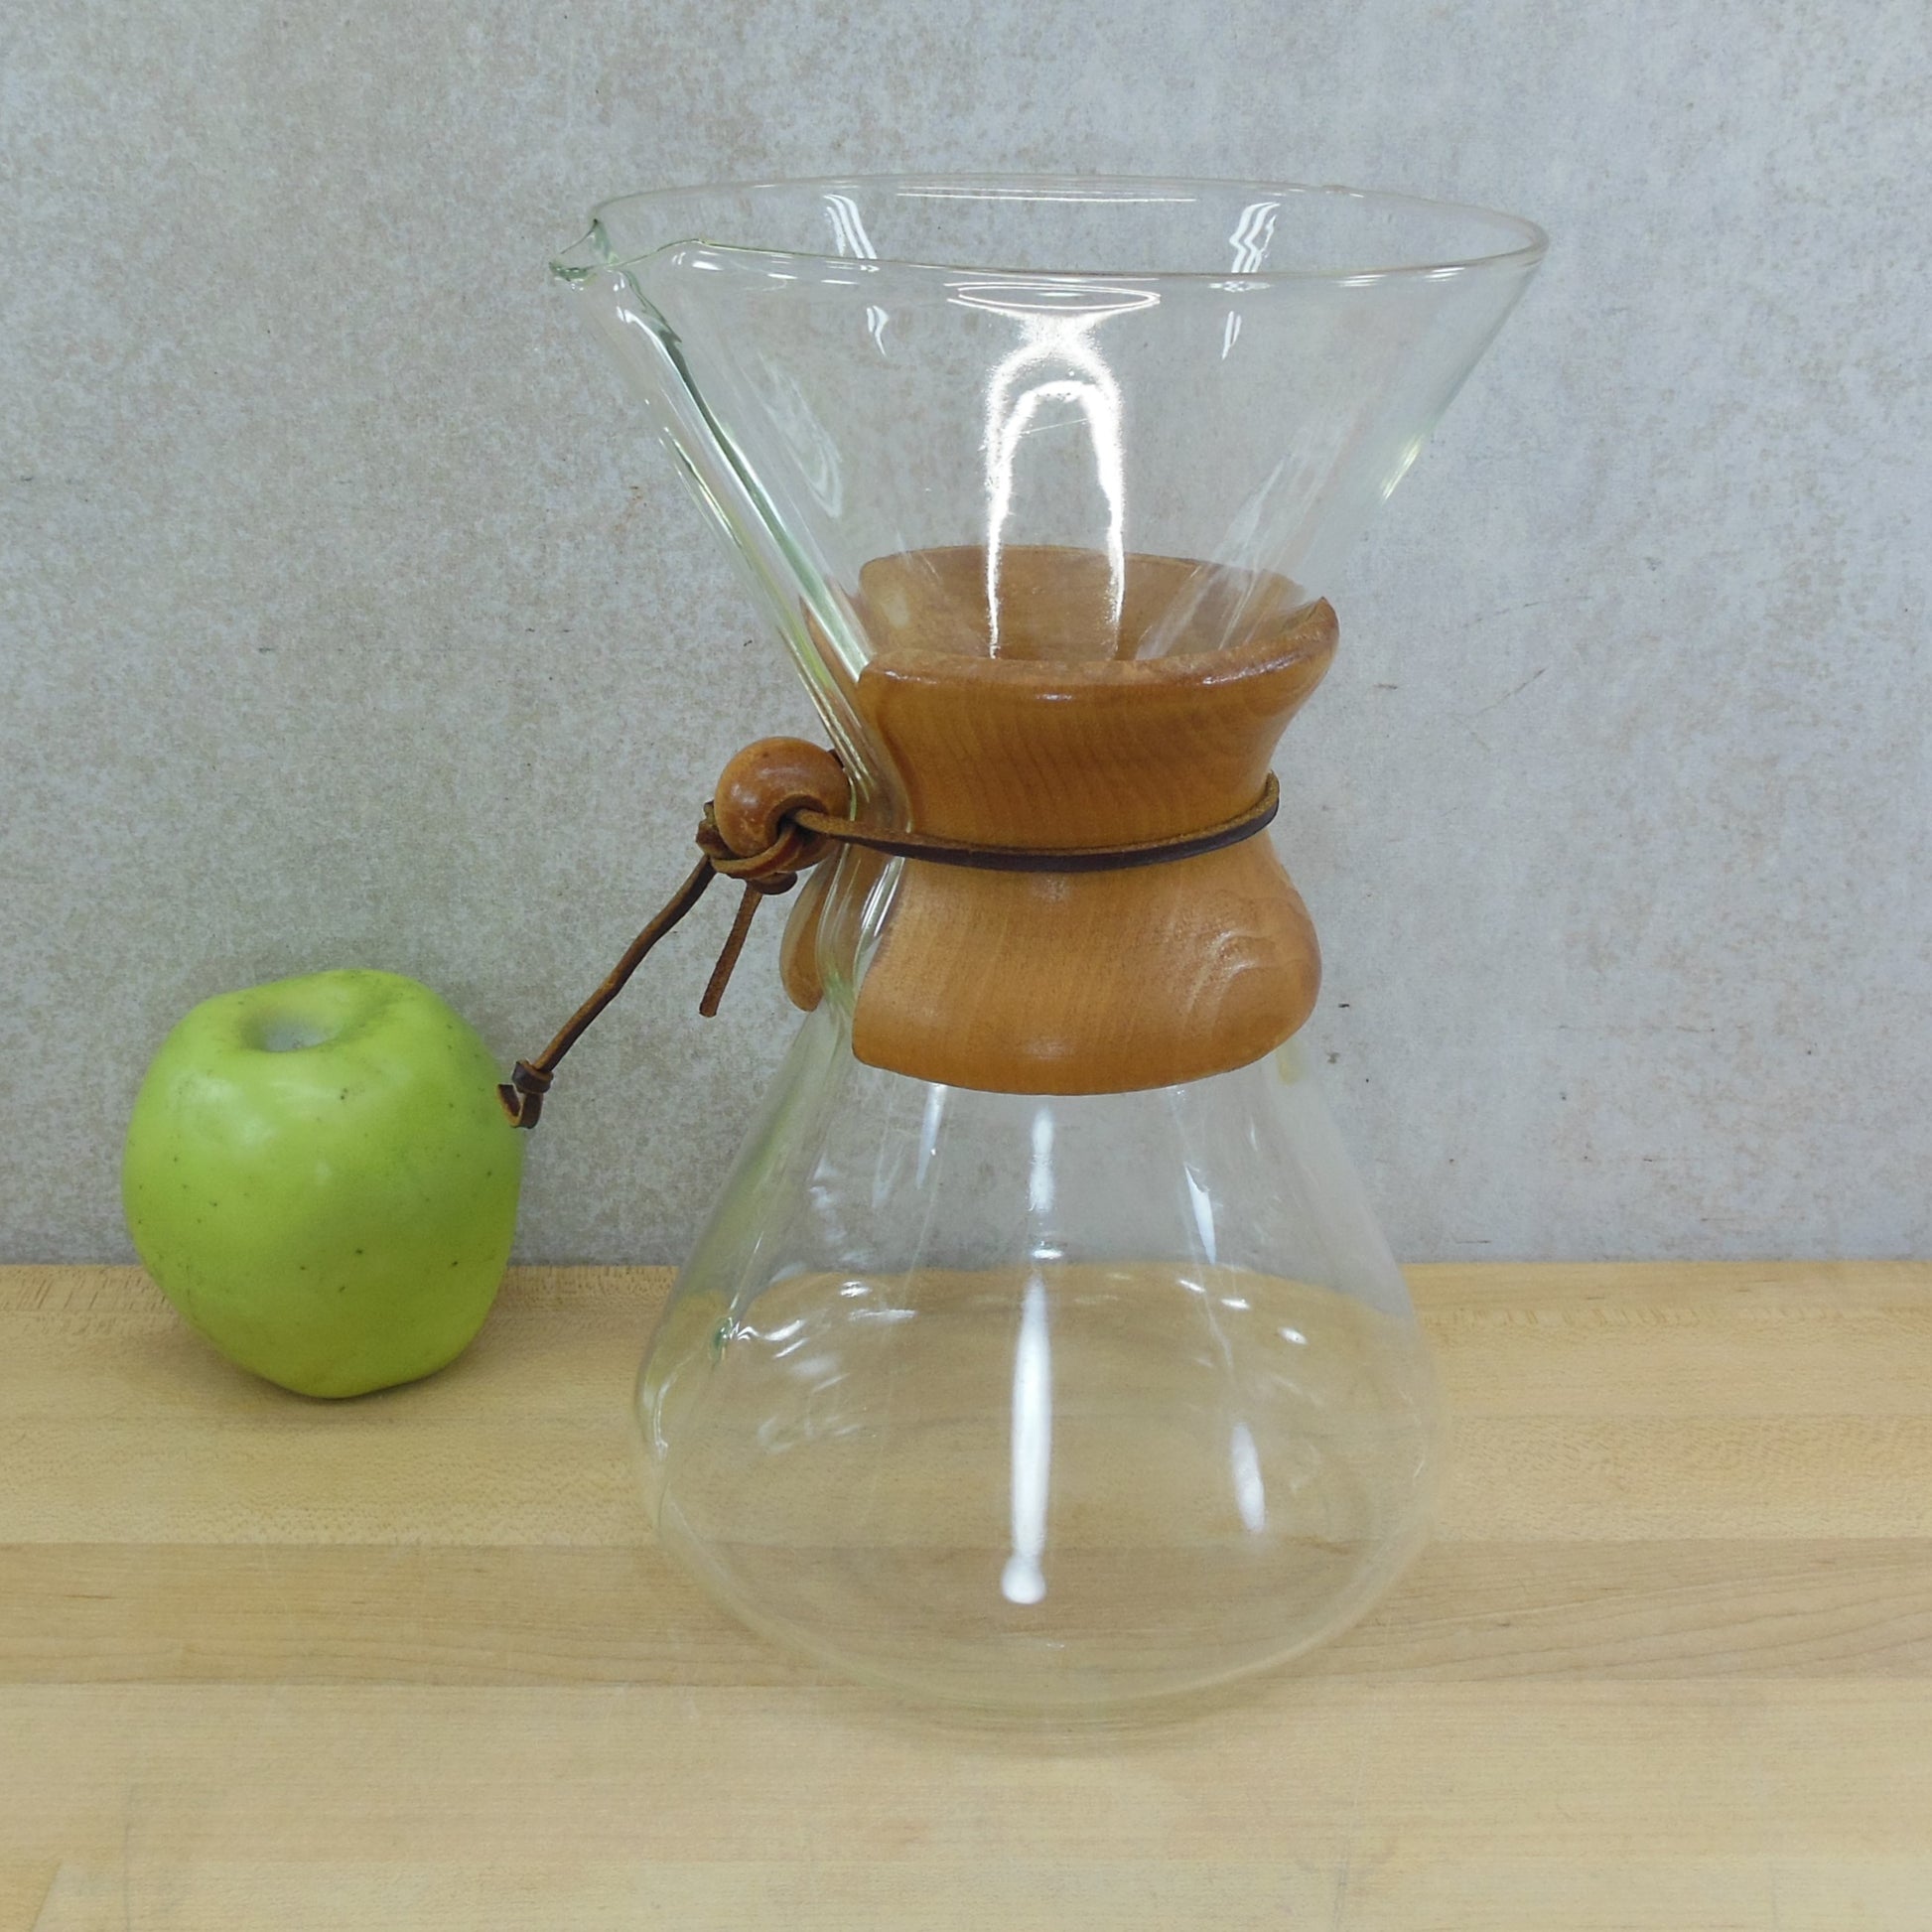 Chemex Auer Glas Germany 9.5" Pour Over Coffee Maker Vintage